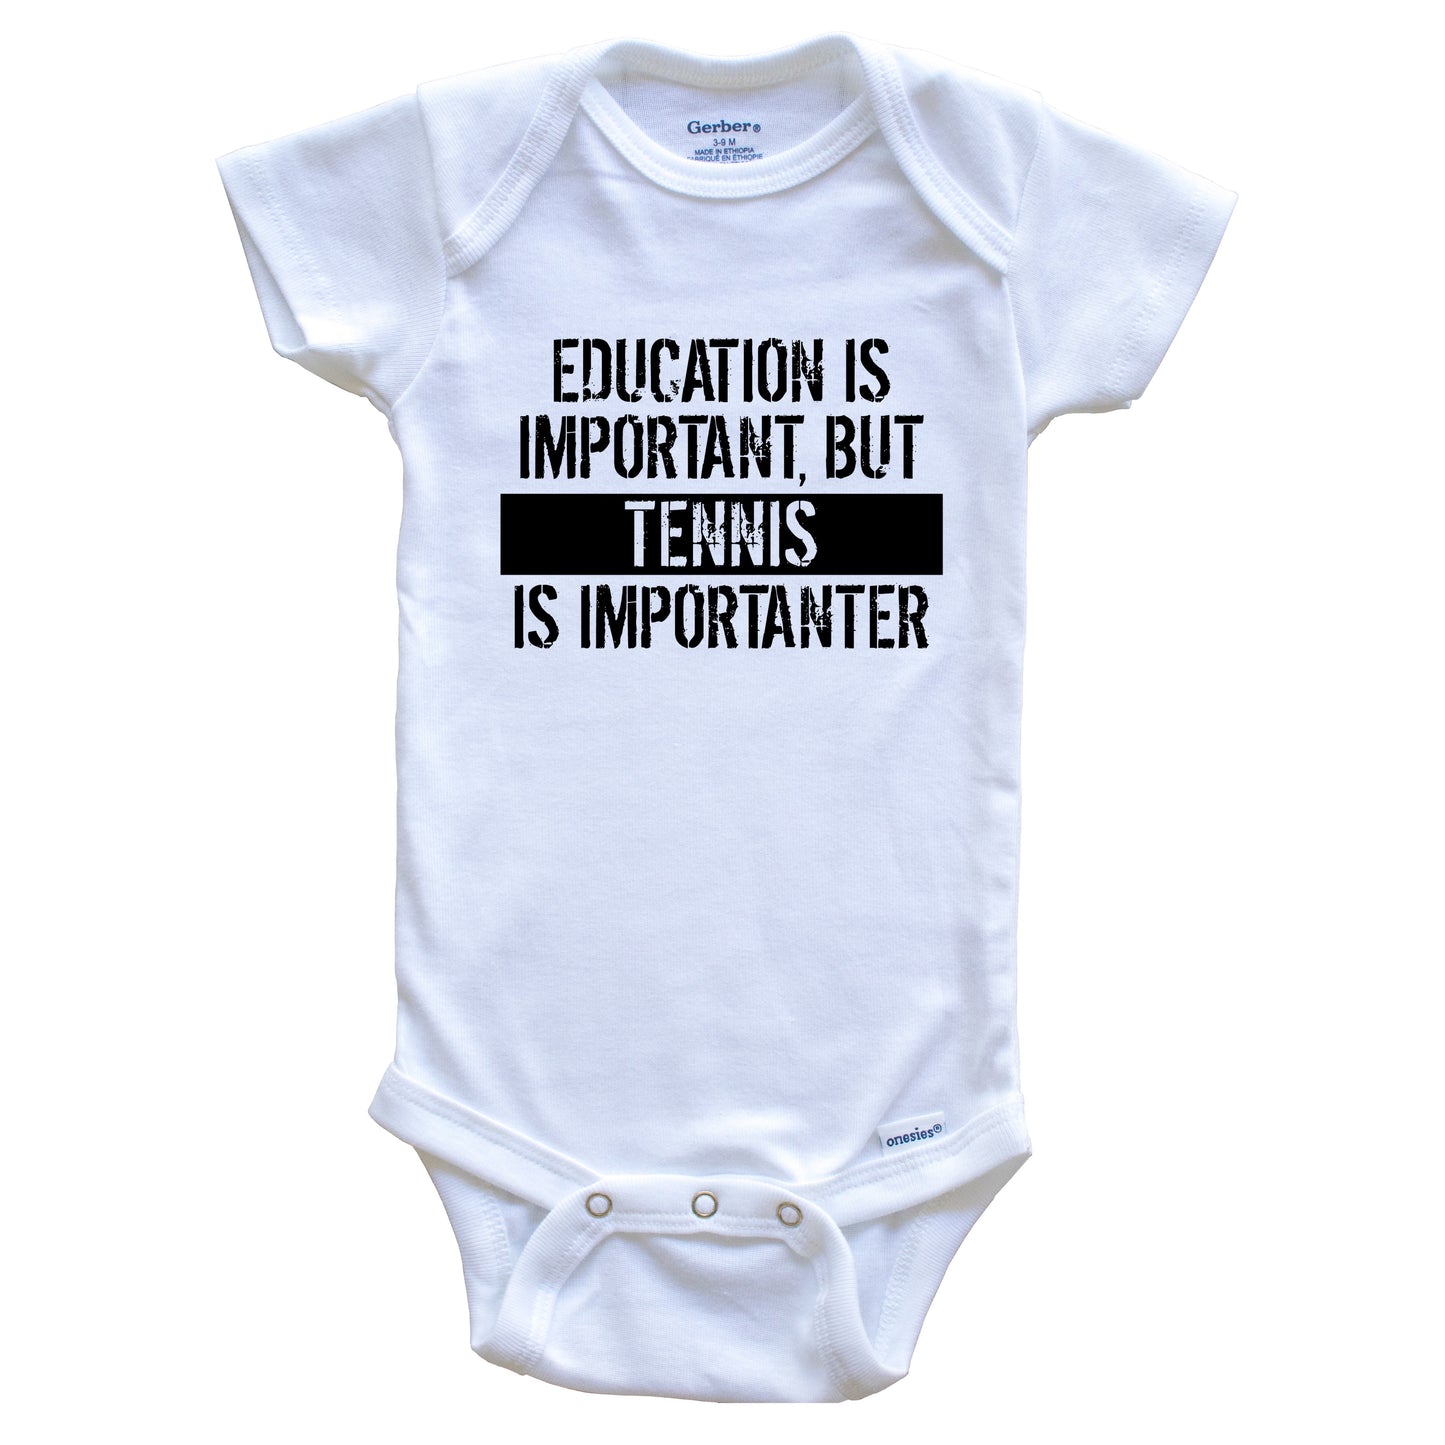 Education Is Important But Tennis Is Importanter Funny Baby Onesie